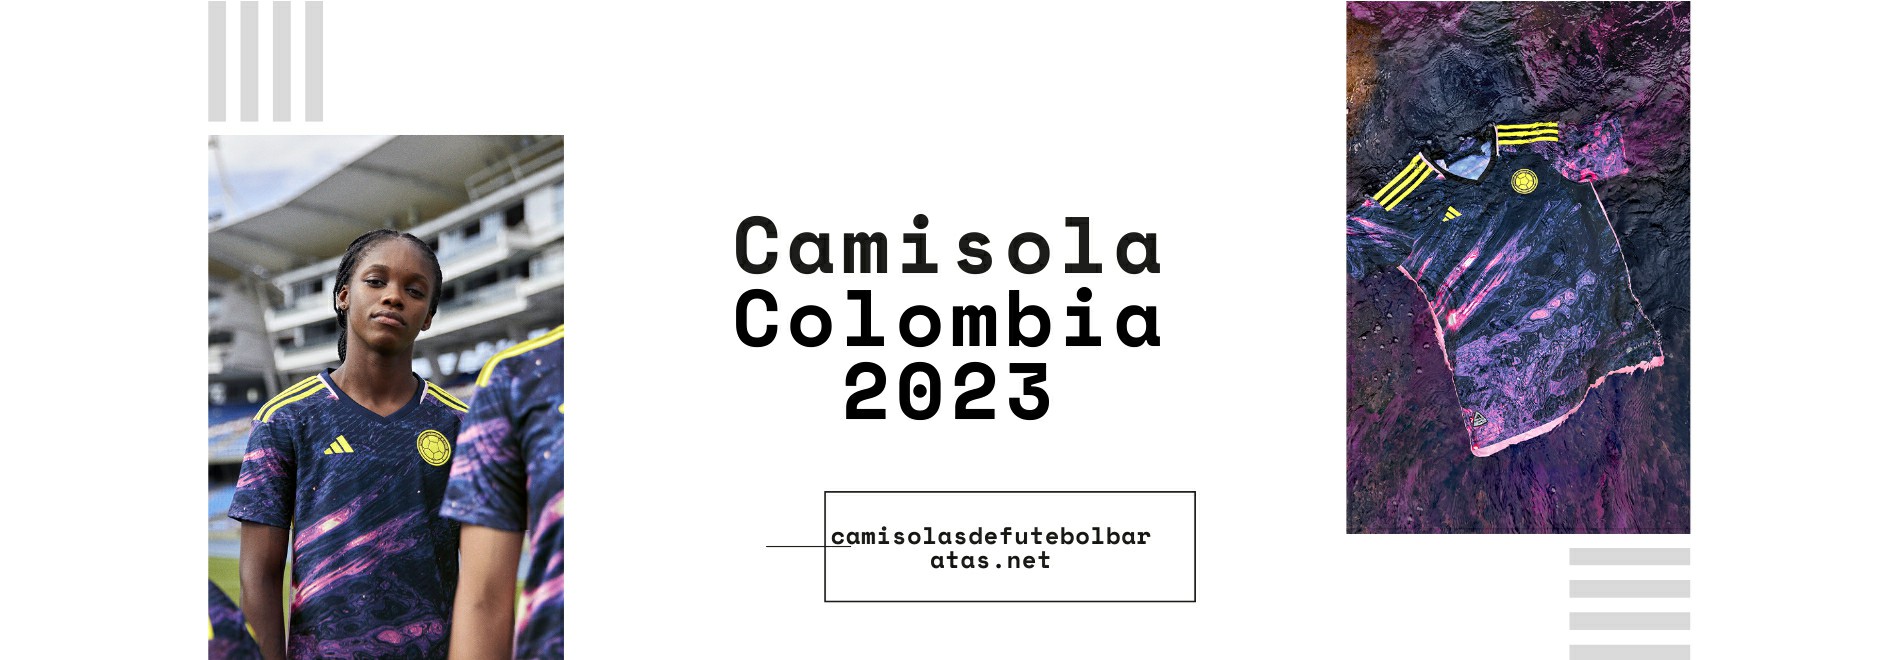 Camisola Colombia 2023-2024